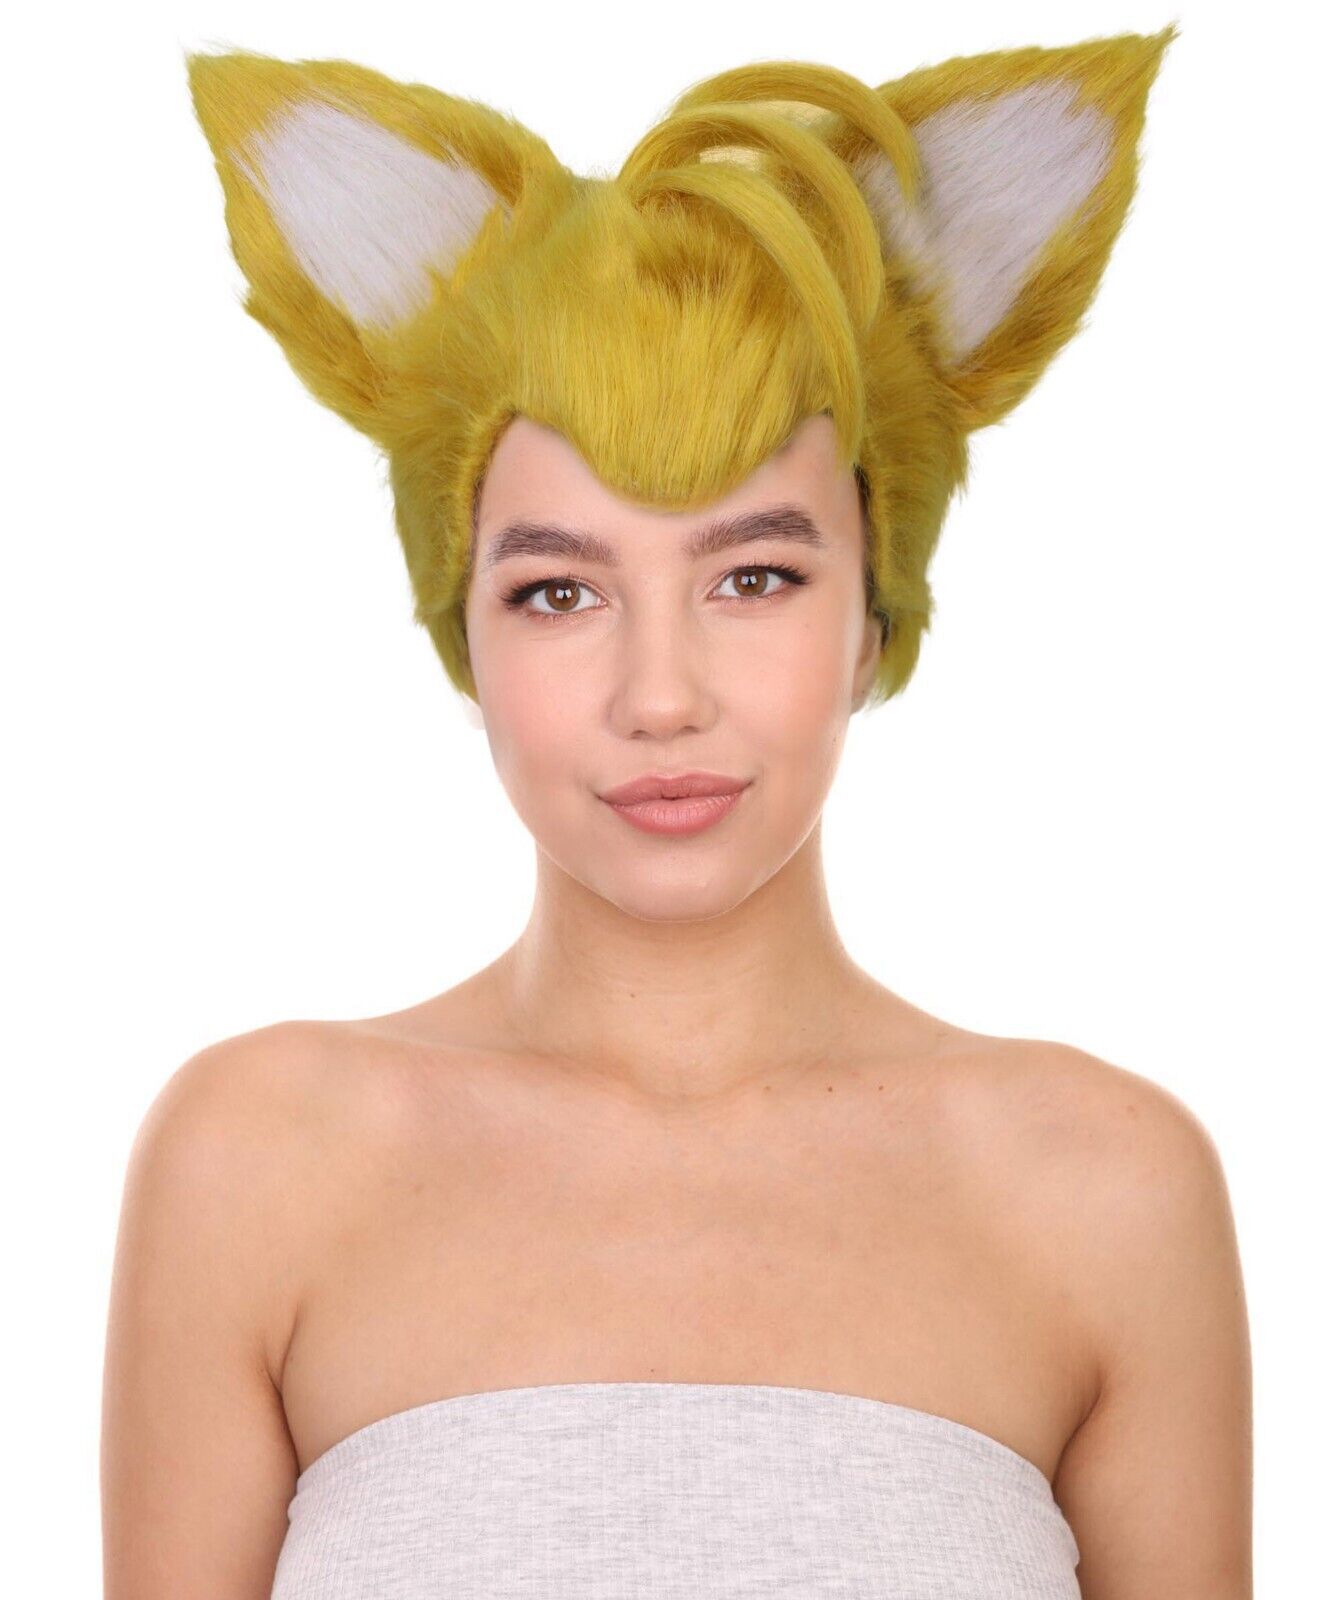 Adult Unisex Video Game Movie Yellow and White Furry Fox Cosplay Wig HW-7053